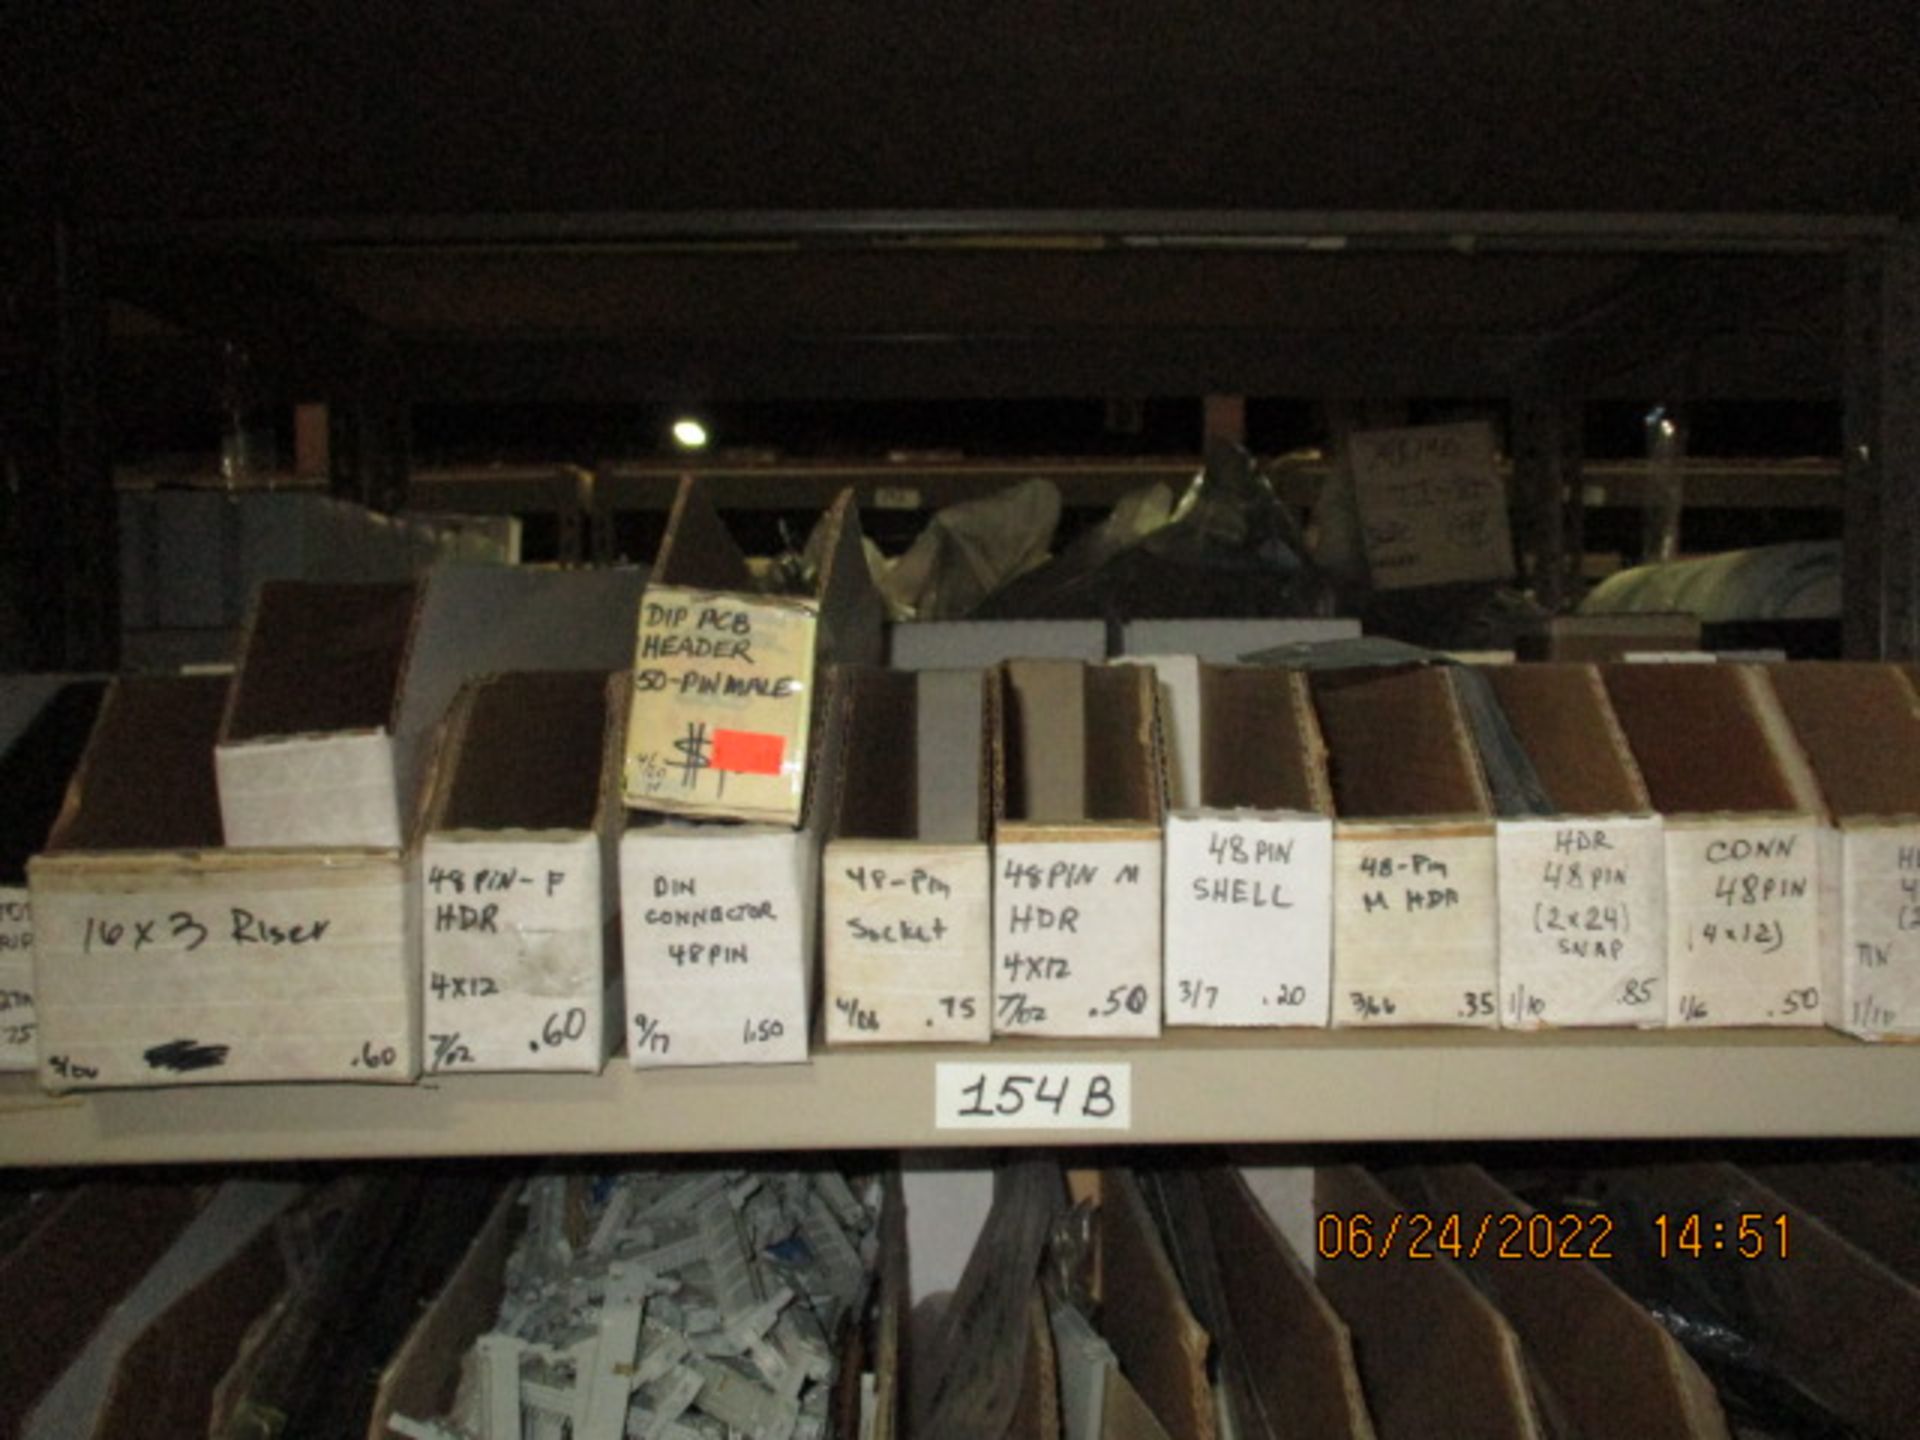 CONTENTS OF SHELVING UNIT CONSISTING OF 44, 45, 46, 48, 50, 52, 55, & 56 PIN CONNECTORS - Image 3 of 6